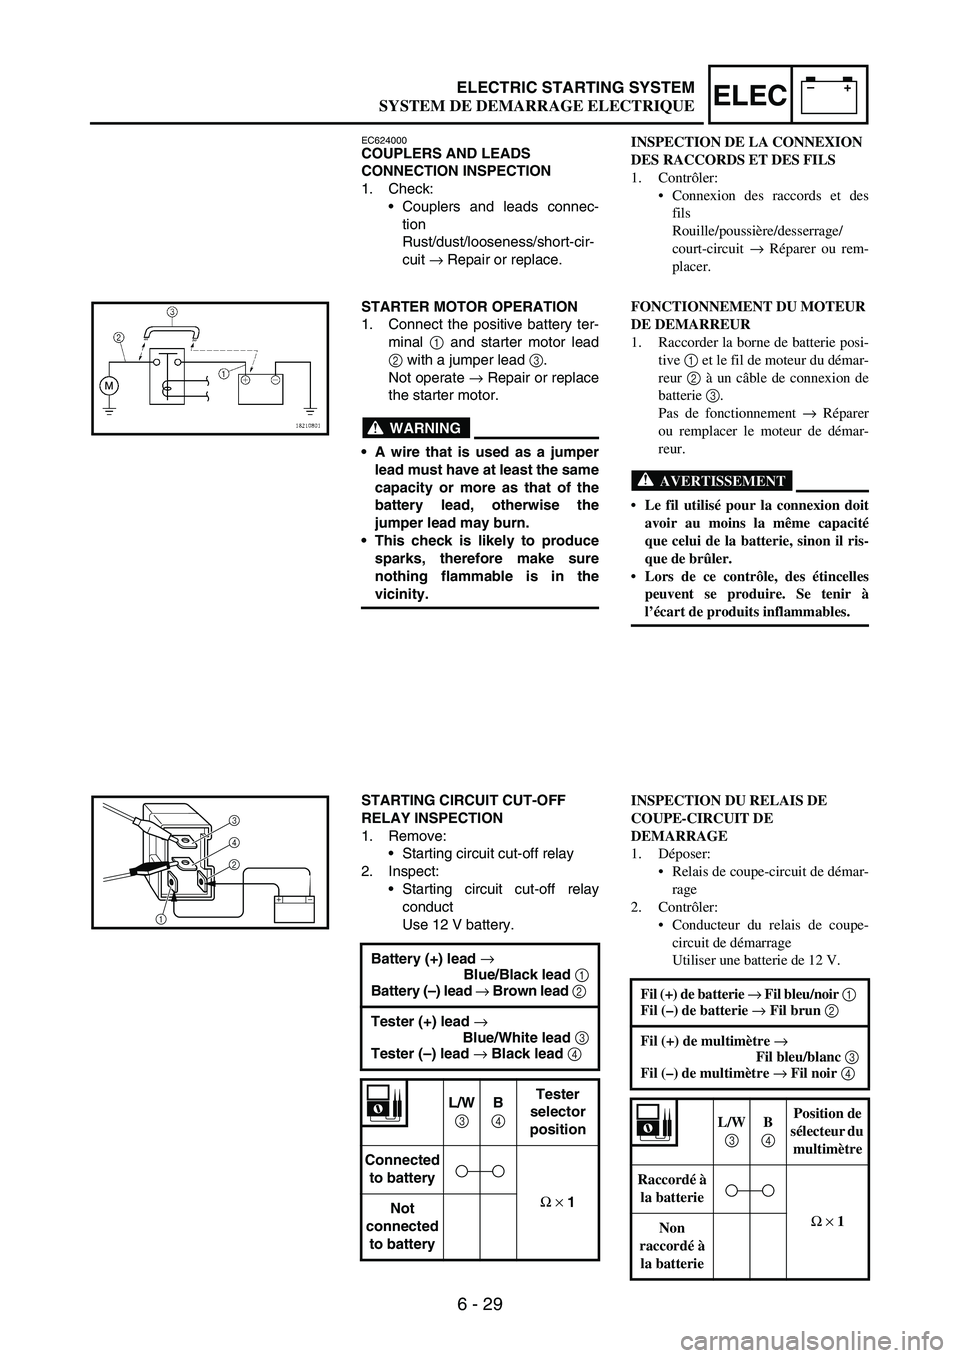 YAMAHA WR 250F 2003  Owners Manual 6 - 29
–+ELECELECTRIC STARTING SYSTEM
EC624000COUPLERS AND LEADS 
CONNECTION INSPECTION
1. Check:
Couplers and leads connec-
tion 
Rust/dust/looseness/short-cir-
cuit 
→ Repair or replace.
STARTE